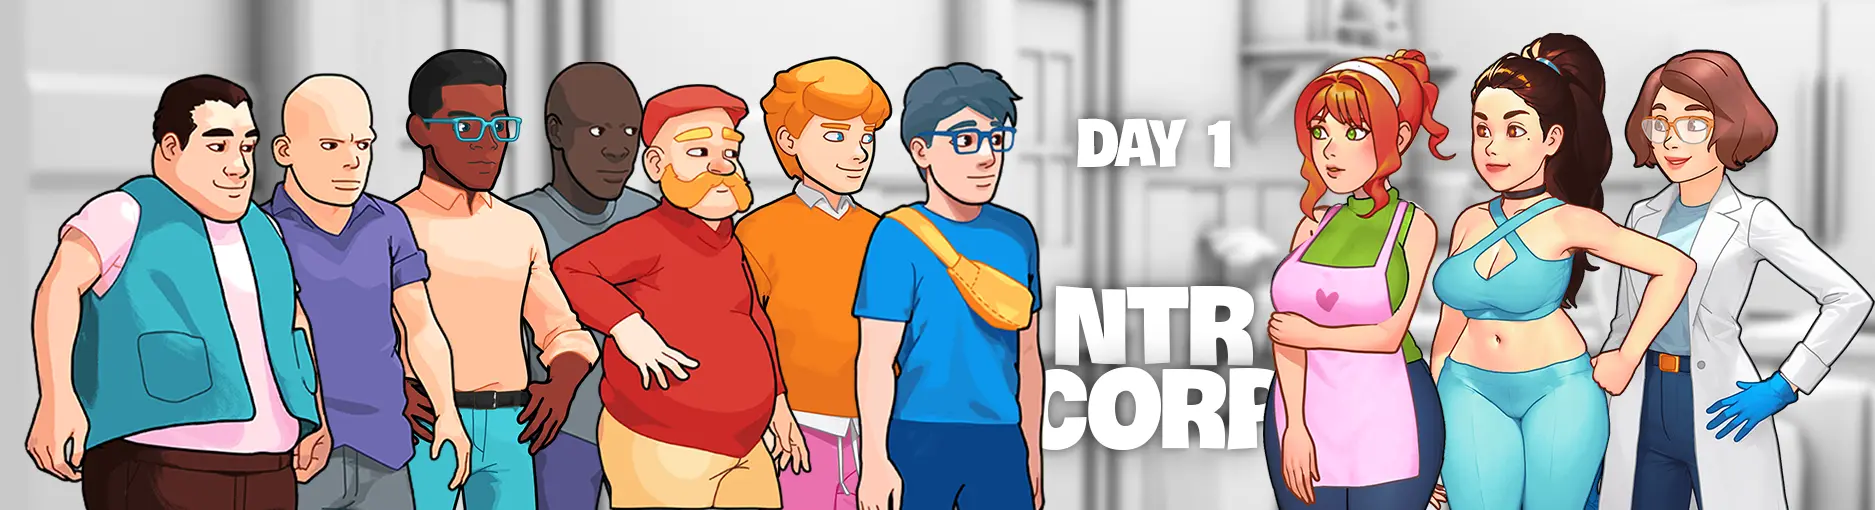 NTR Corp - Updated Day 1 - Day 2 main image